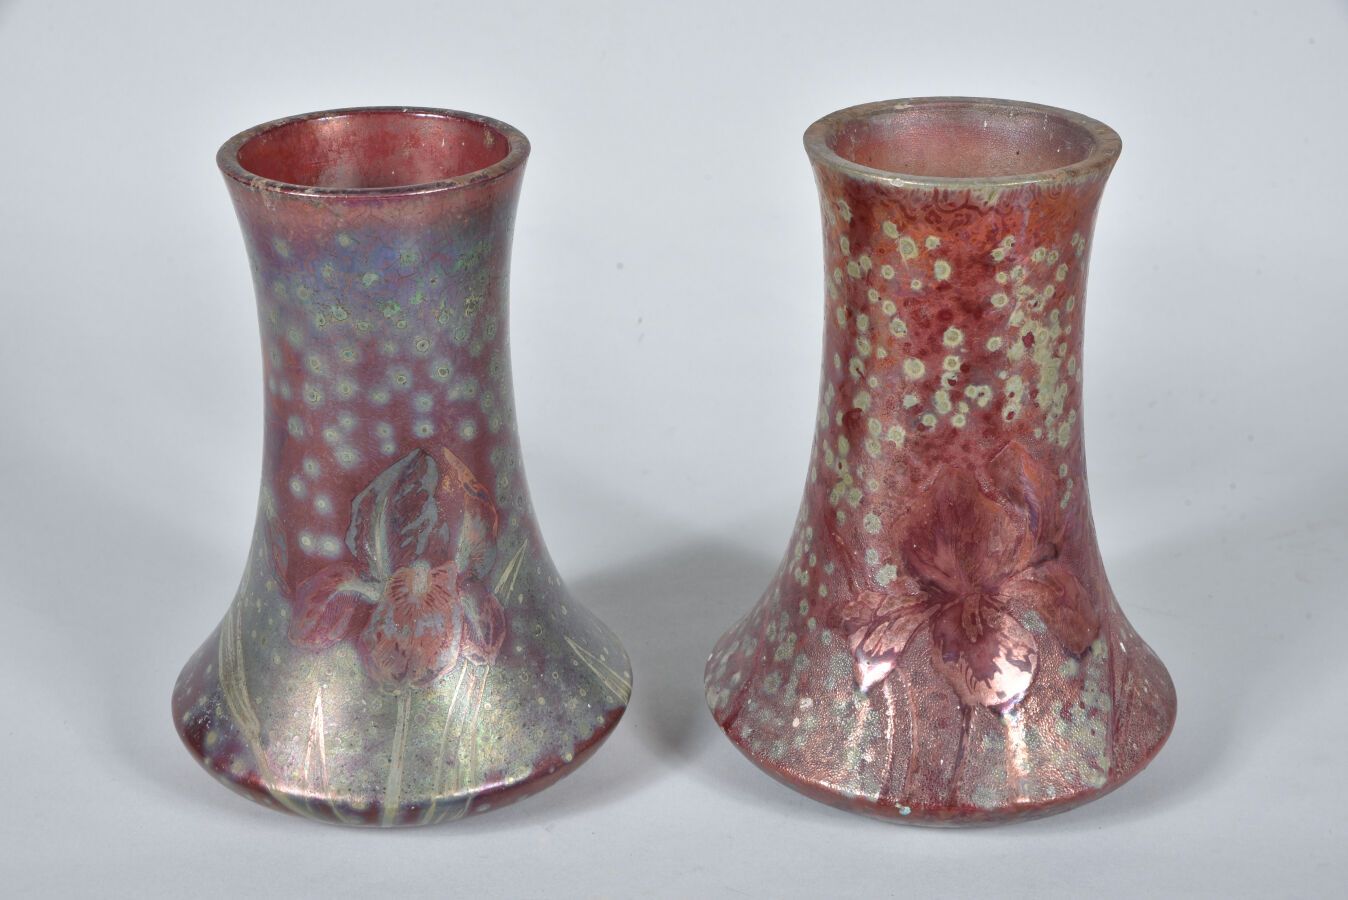 Null Delphin MASSIER (1836-1907)

Pair of biconical vases in iridescent glossy p&hellip;